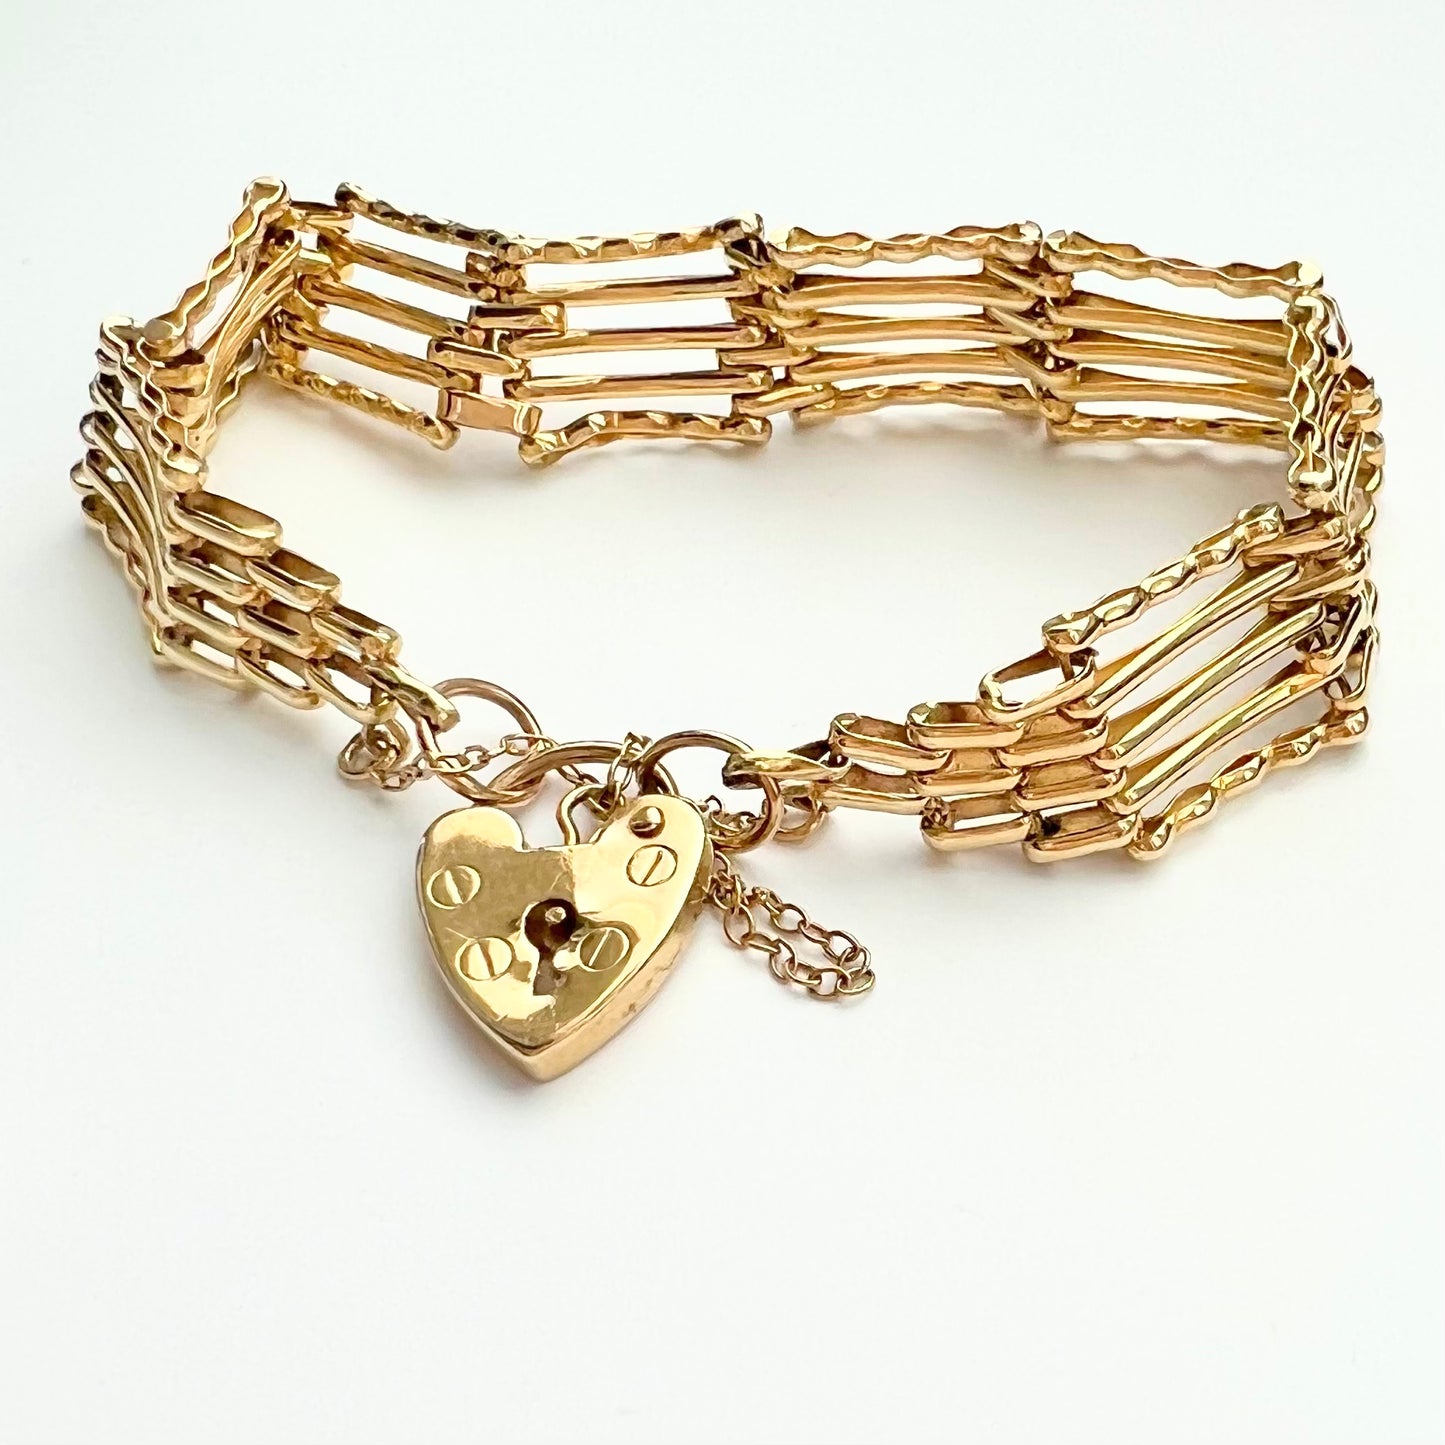 Pre Owned 9ct Yellow Gold Gate Bracelet  Buy Online  Free Insured UK  Delivery